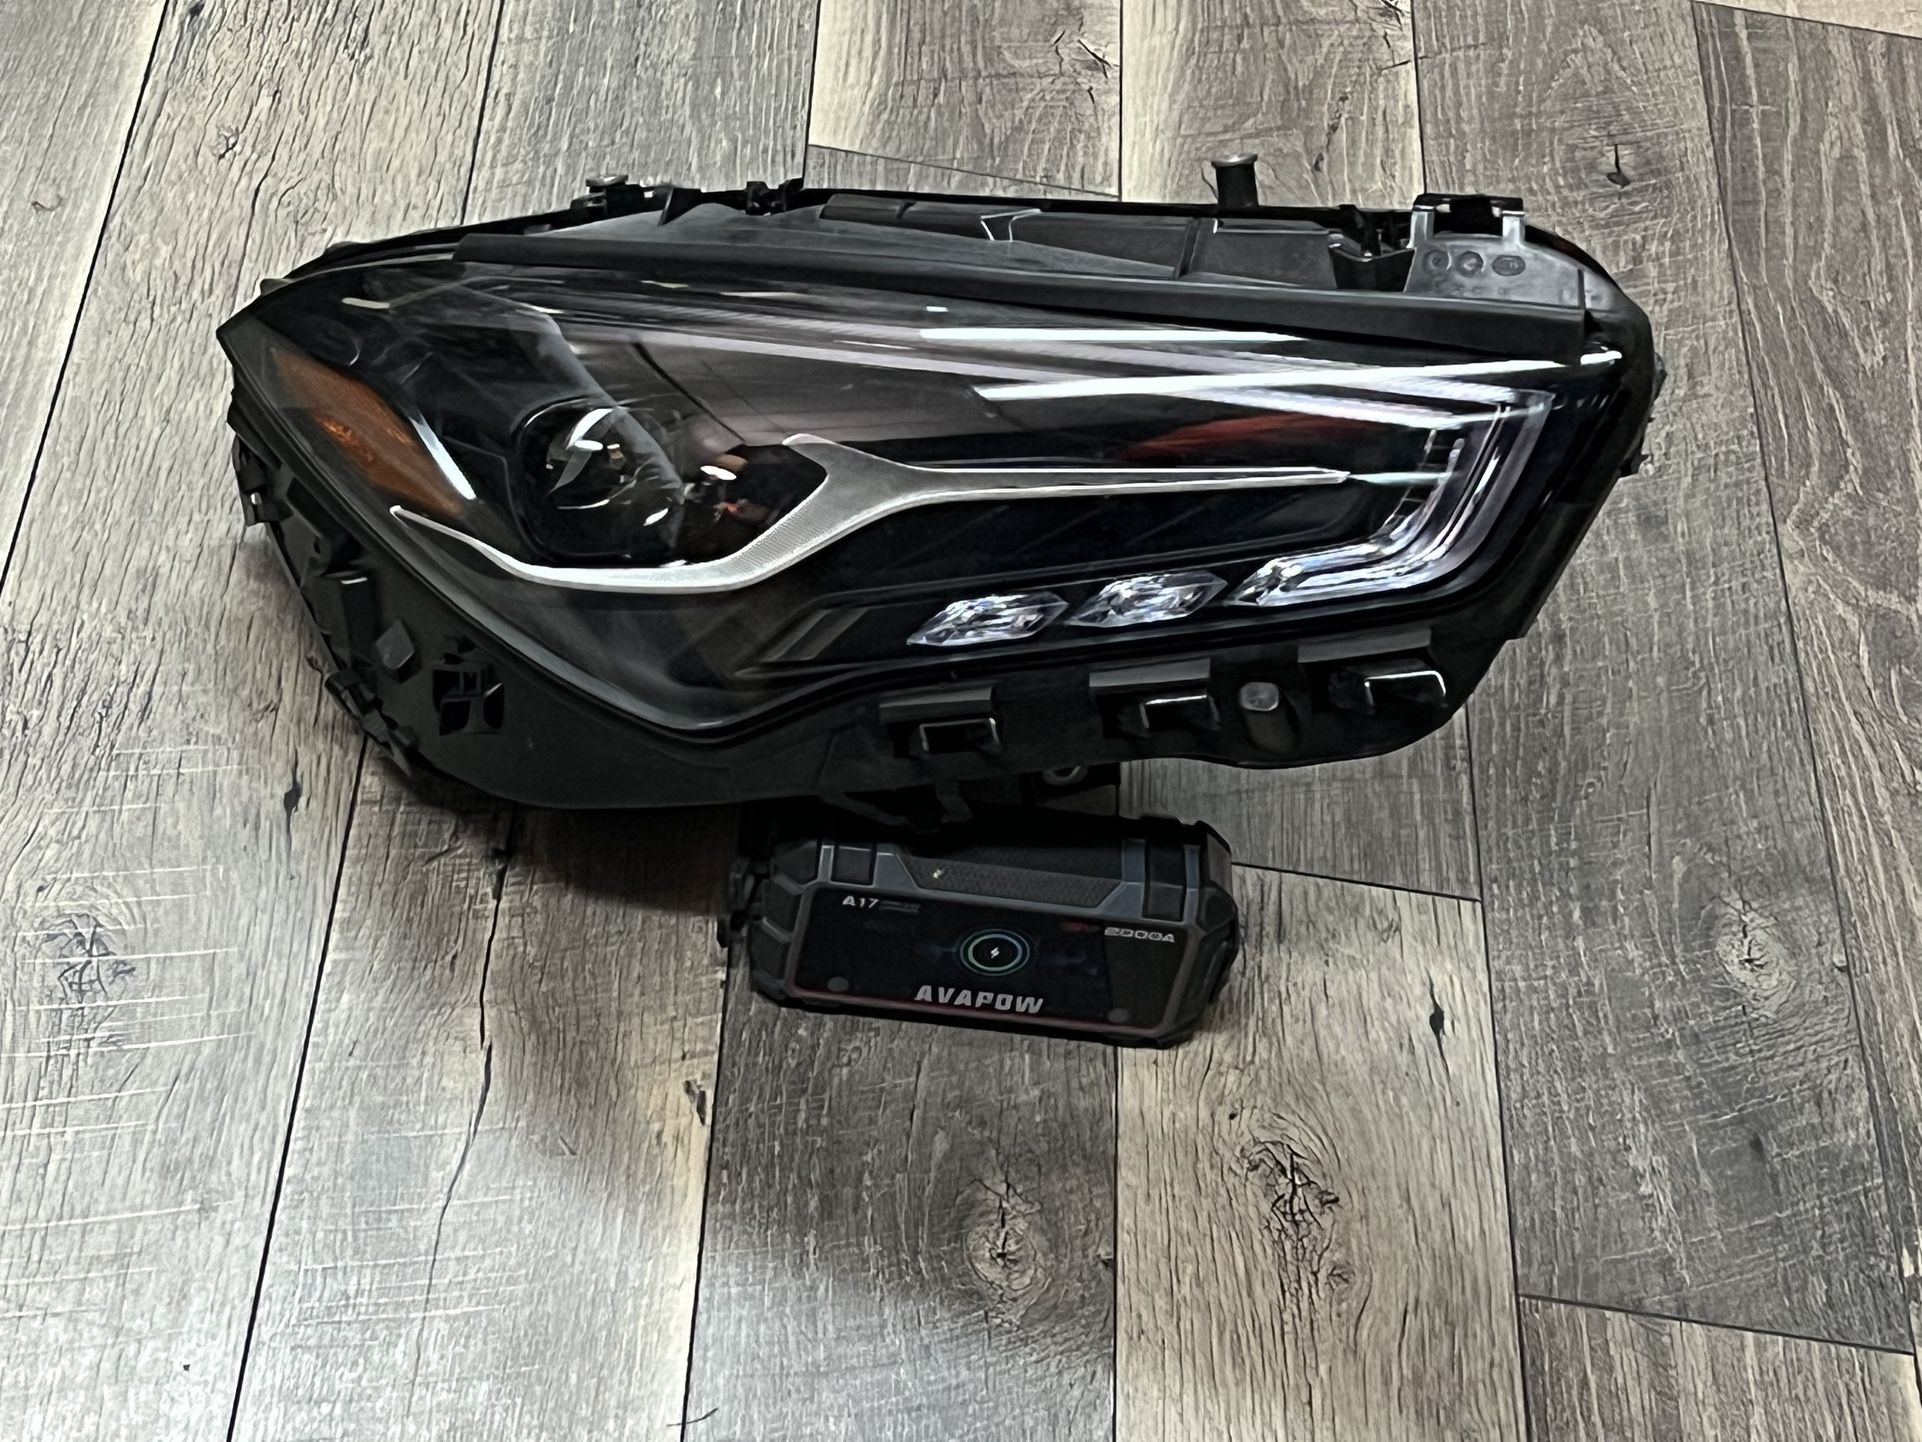 2023-2024 MERCEDES BENZ CLA250 W118 RIGHT LED HIGH PERFORMANCE HEADLAMP HEADLIGHT SHELL ONLY IN EXCELLENT CONDITION 